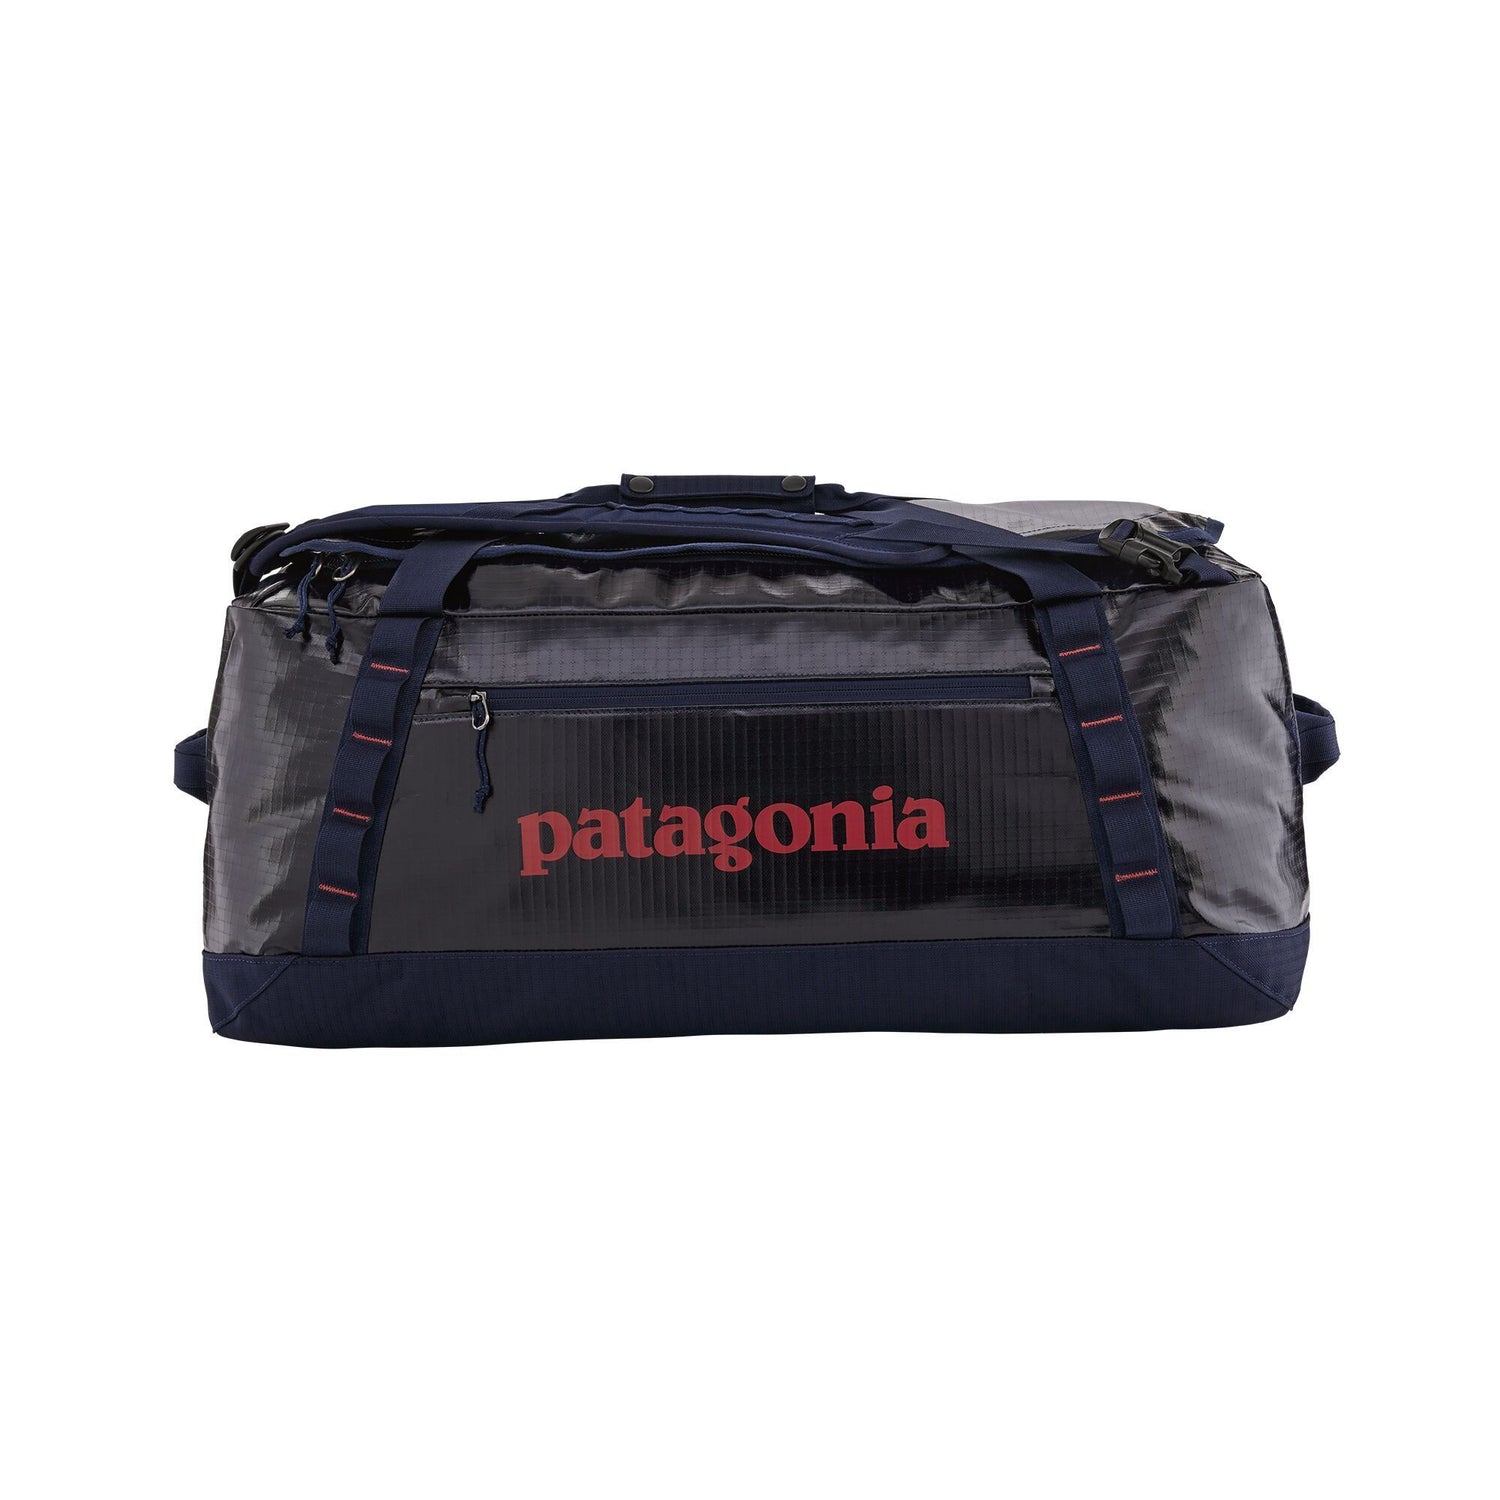 Patagonia Black Hole Duffel Bag 55L - 100 % Recycled Polyester Classic Navy Bags